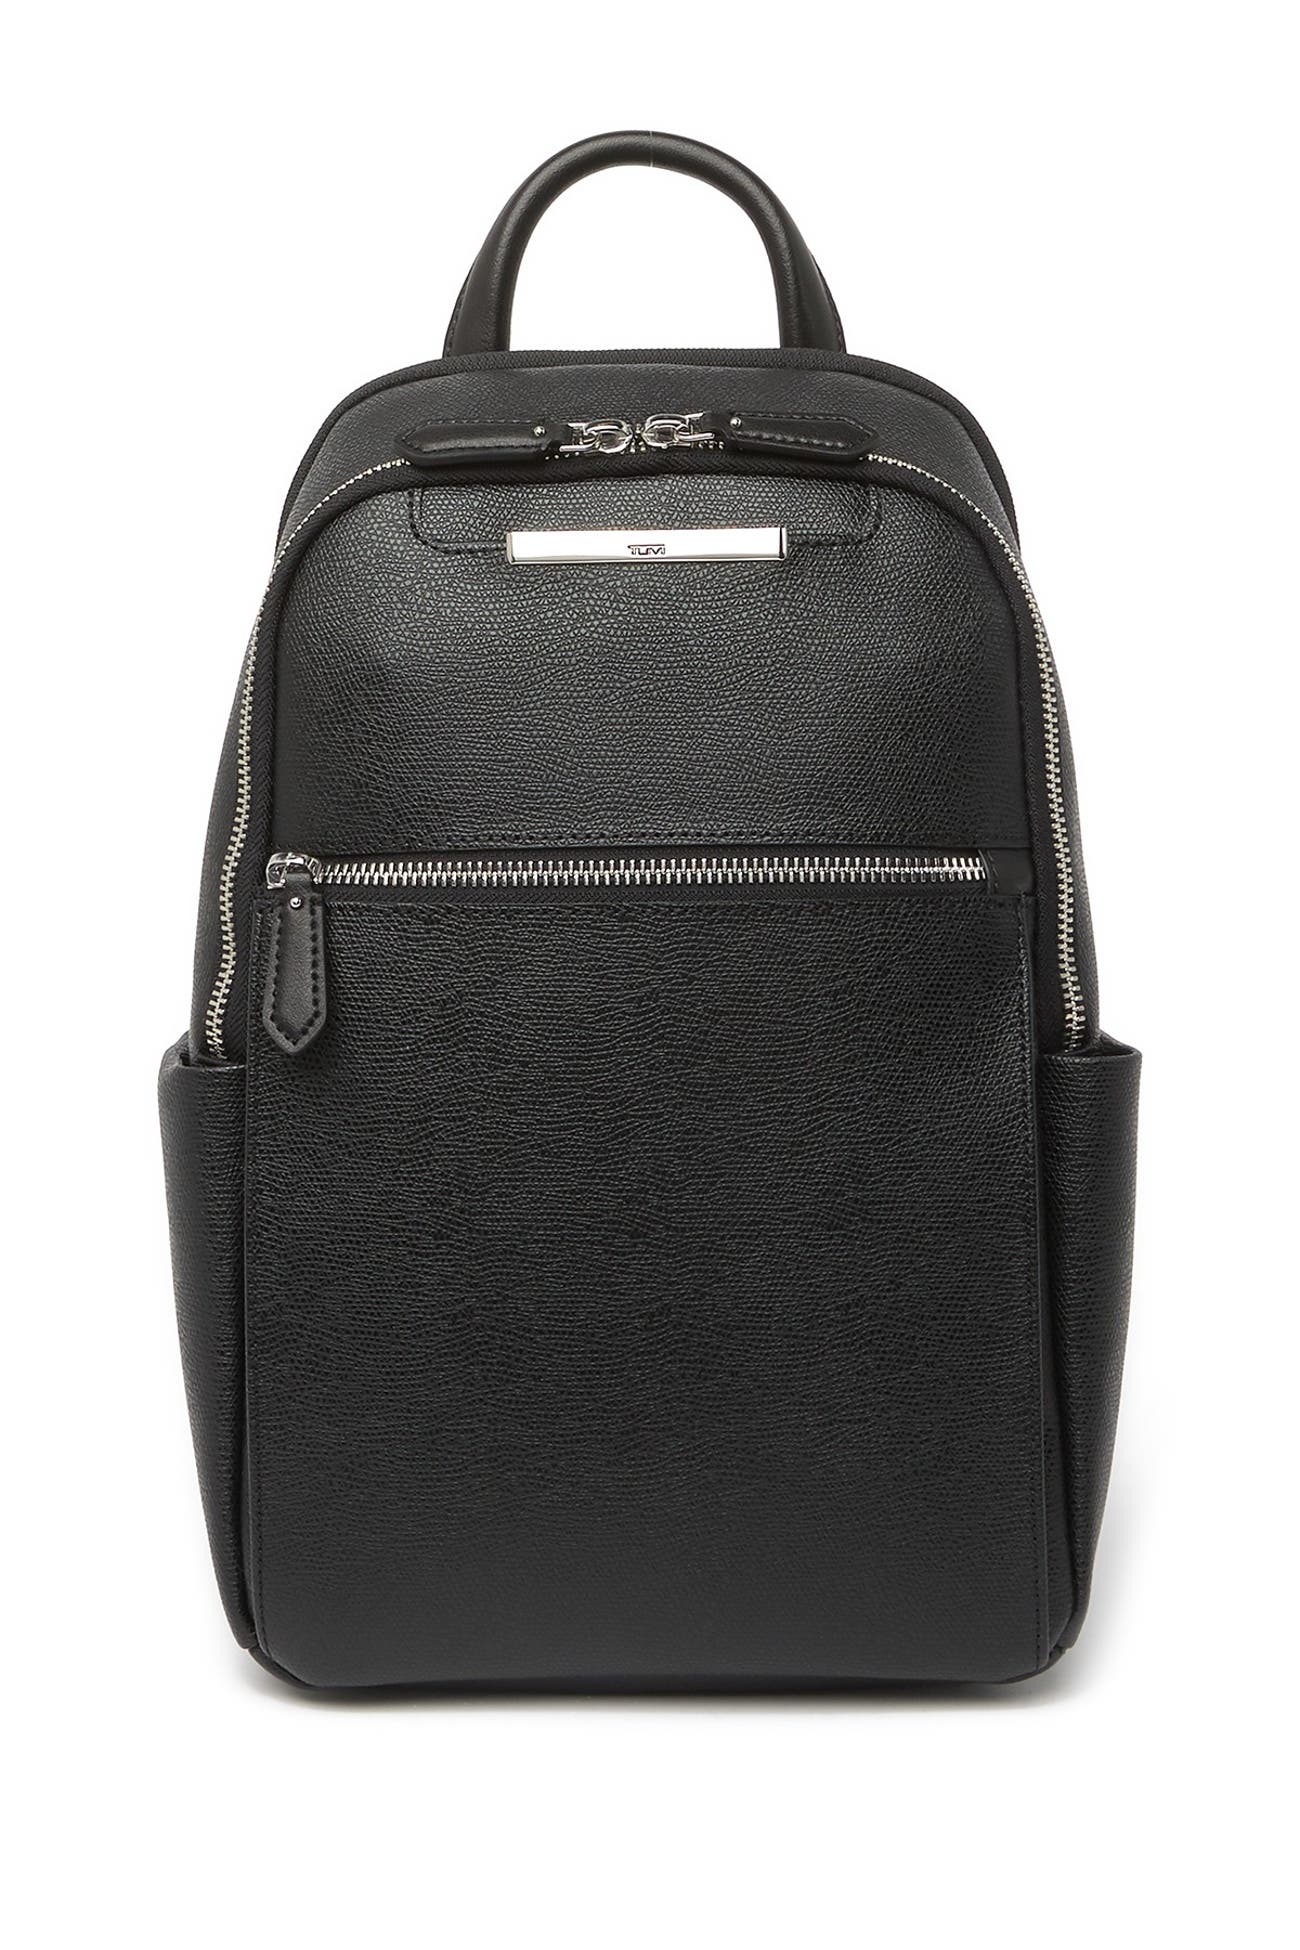 Tumi | Clara Small Leather Backpack | Nordstrom Rack